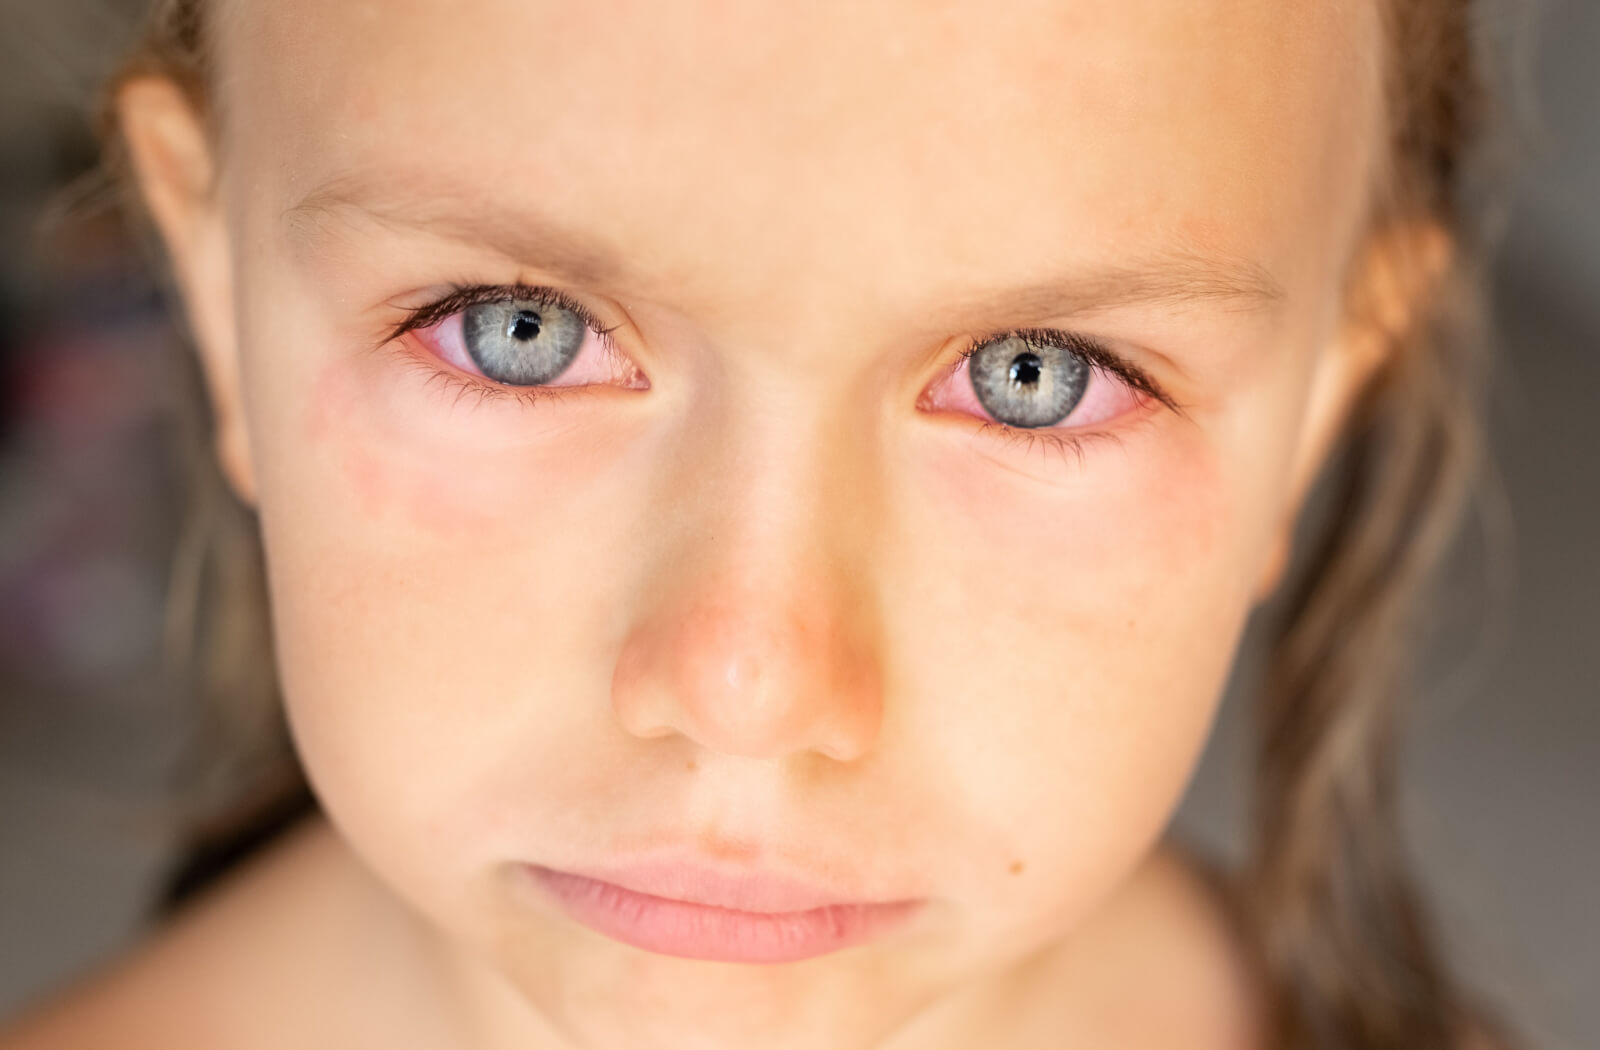 A close-up of a kid with redness in her eyes possibly caused by allergies.